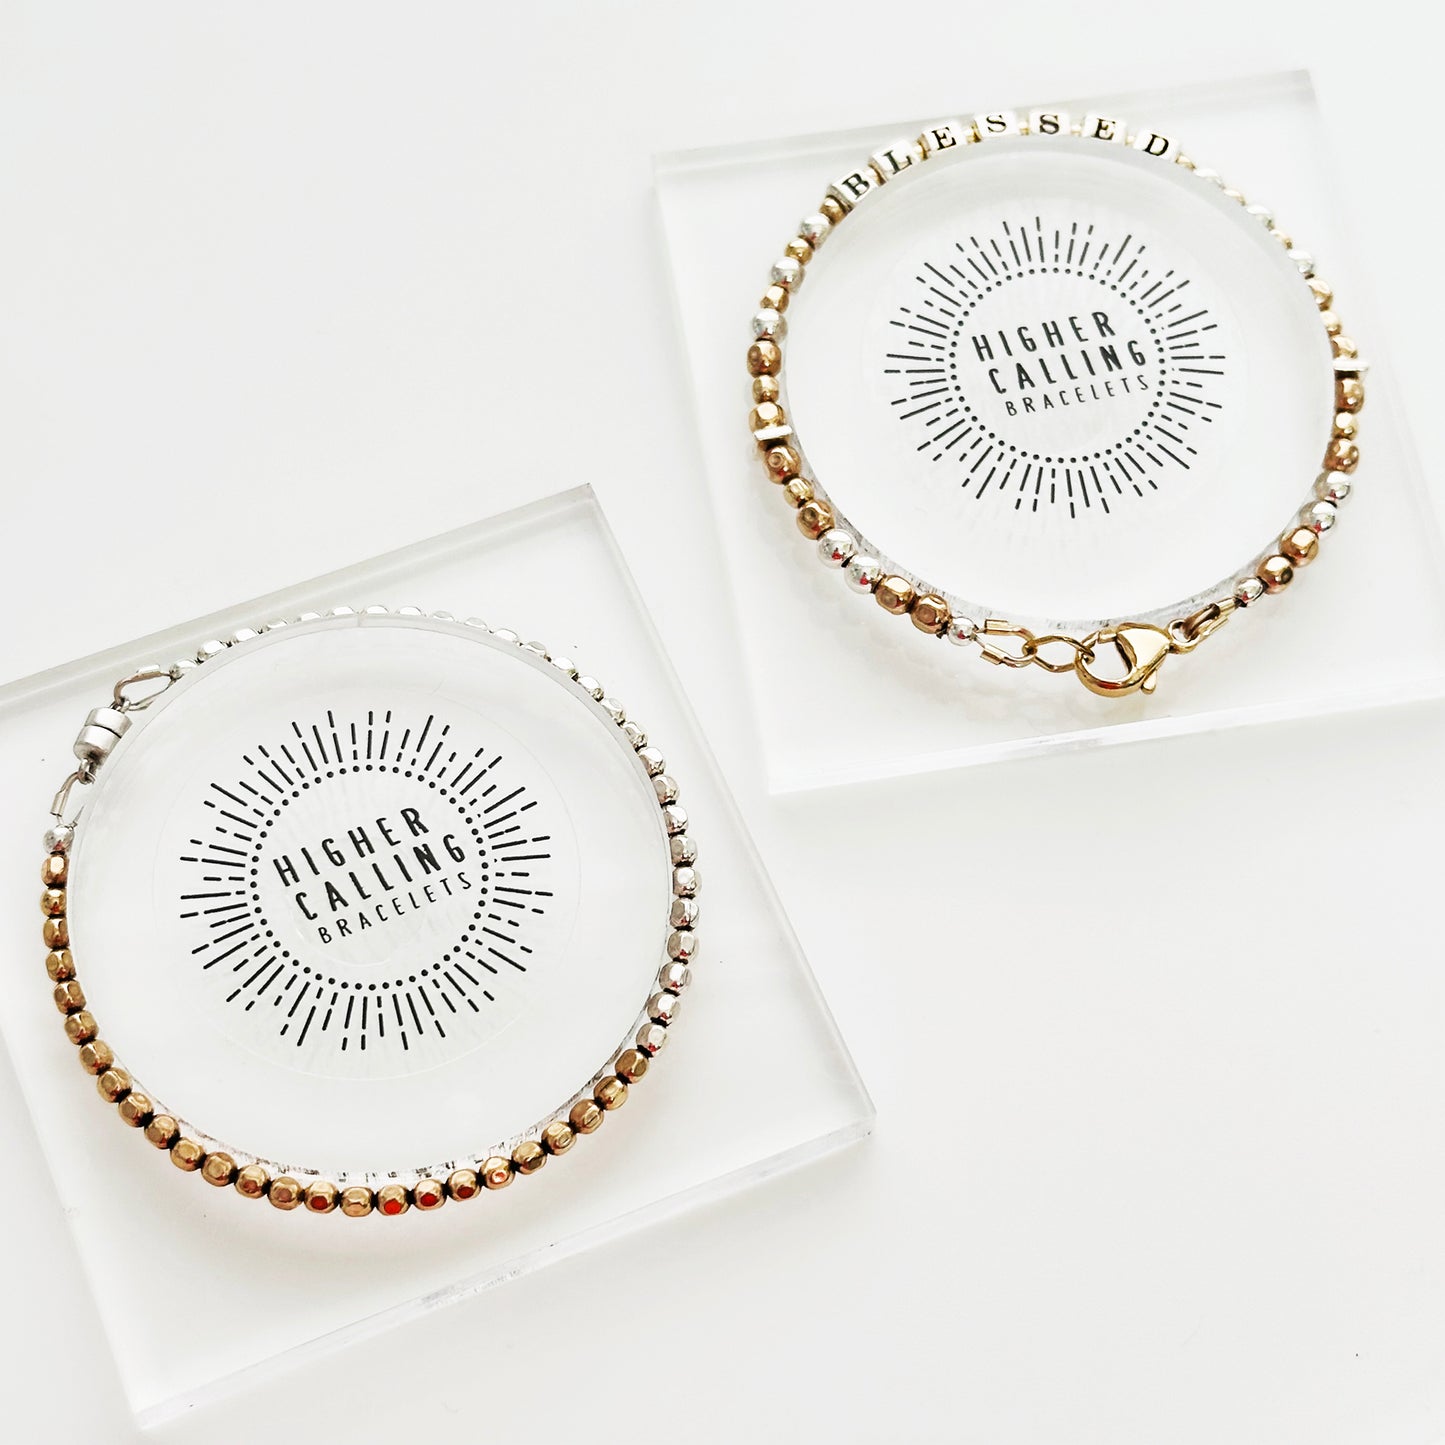 Blessed Engraved Gift Bracelet in gold and silver by Higher Calling Bracelets, shown in packaging